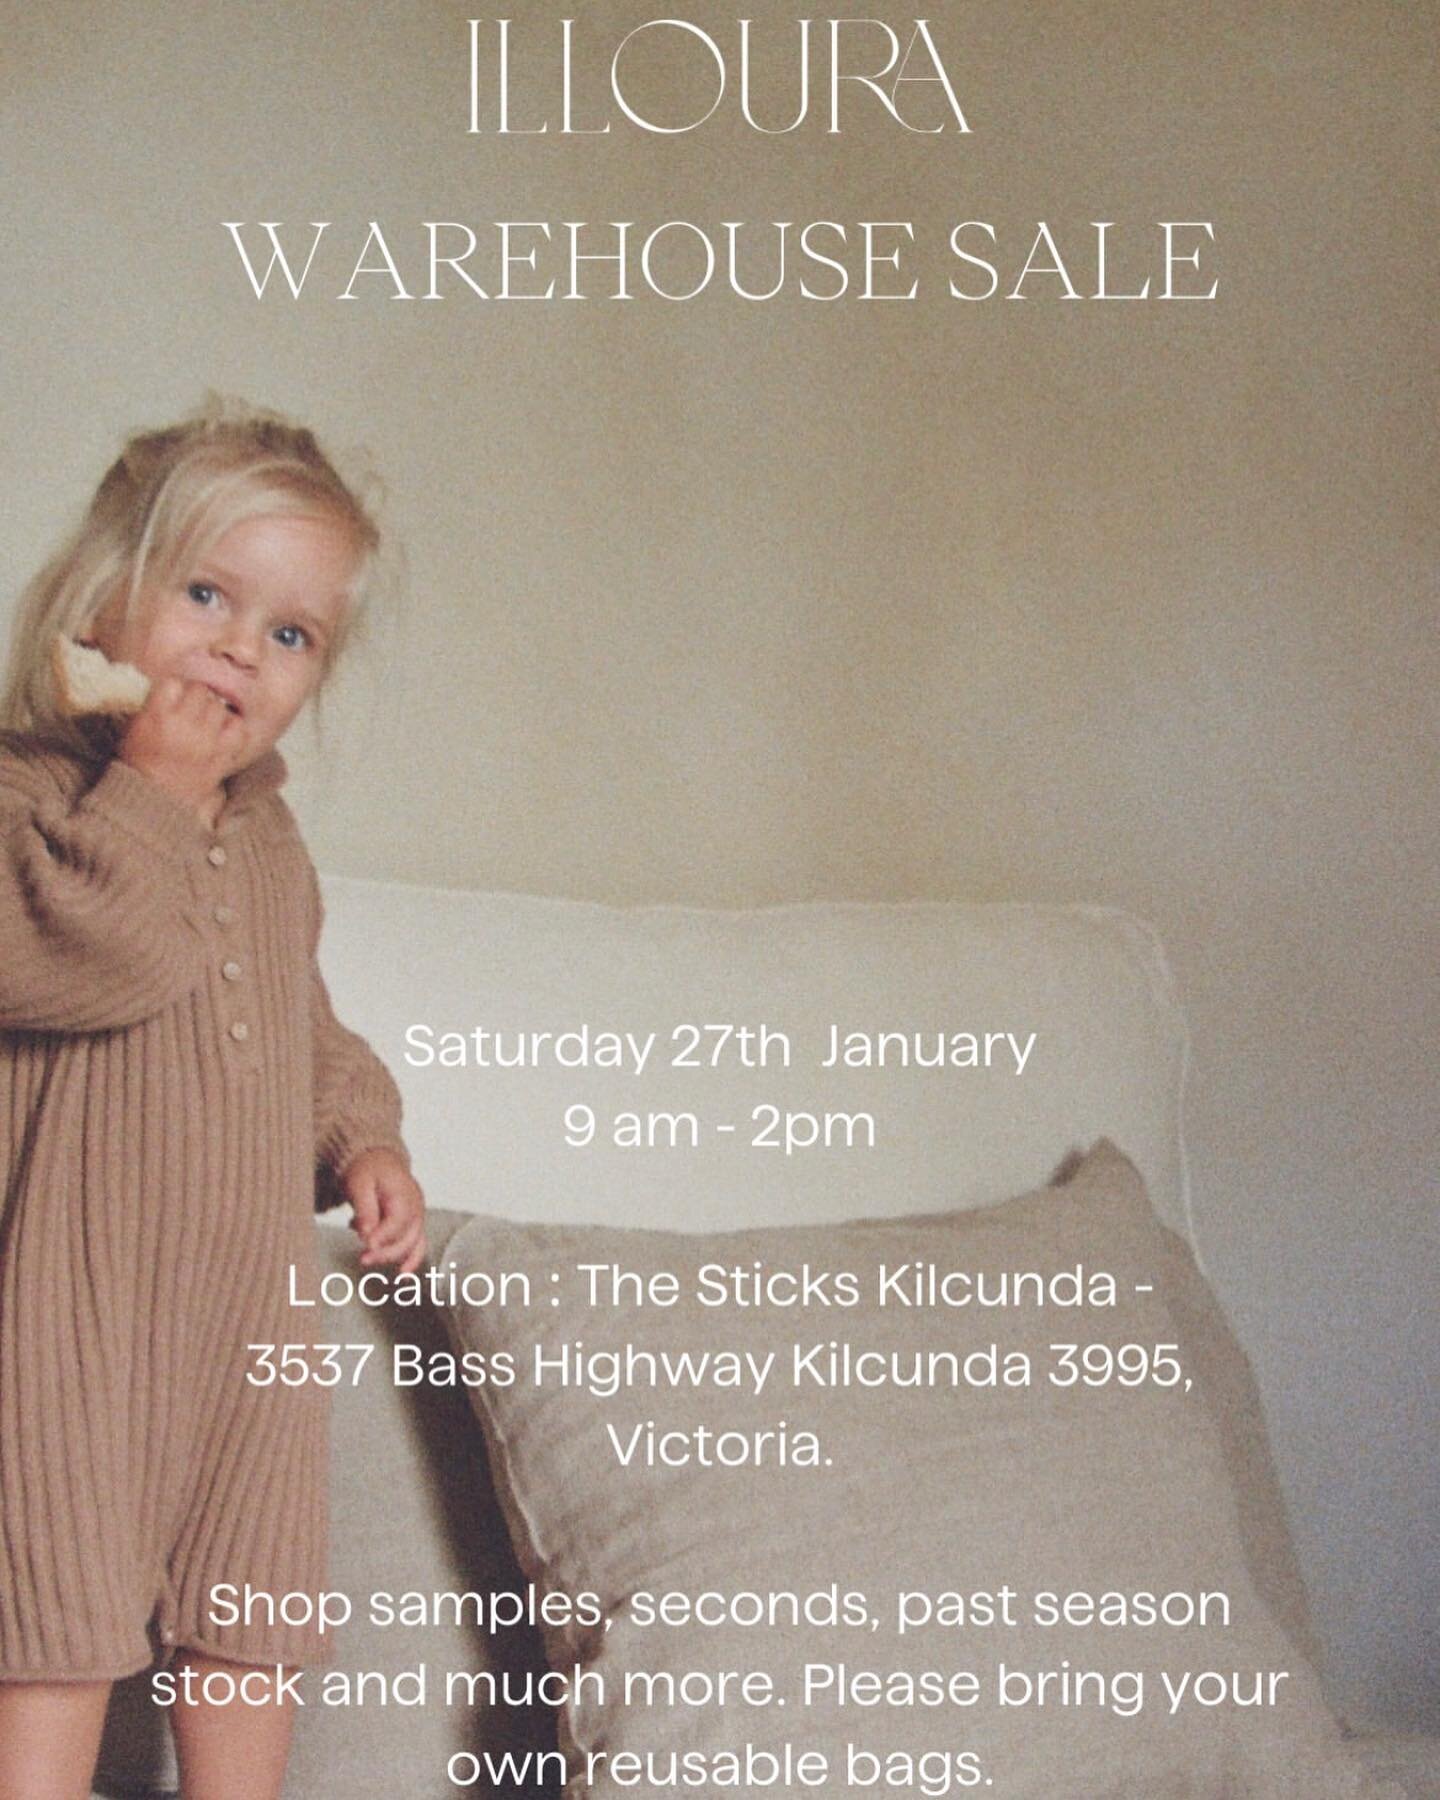 We are very excited for @illoura.thelabel warehouse sale this Saturday the 27th 9am - 2pm. @thestickskilcunda @kilcundageneralstore 
.
.
.
.
#thestickskilcunda #kilcunda #bunarong #boonwurrungcountry #ohdearthesticks #somewhereonthecoast #community #